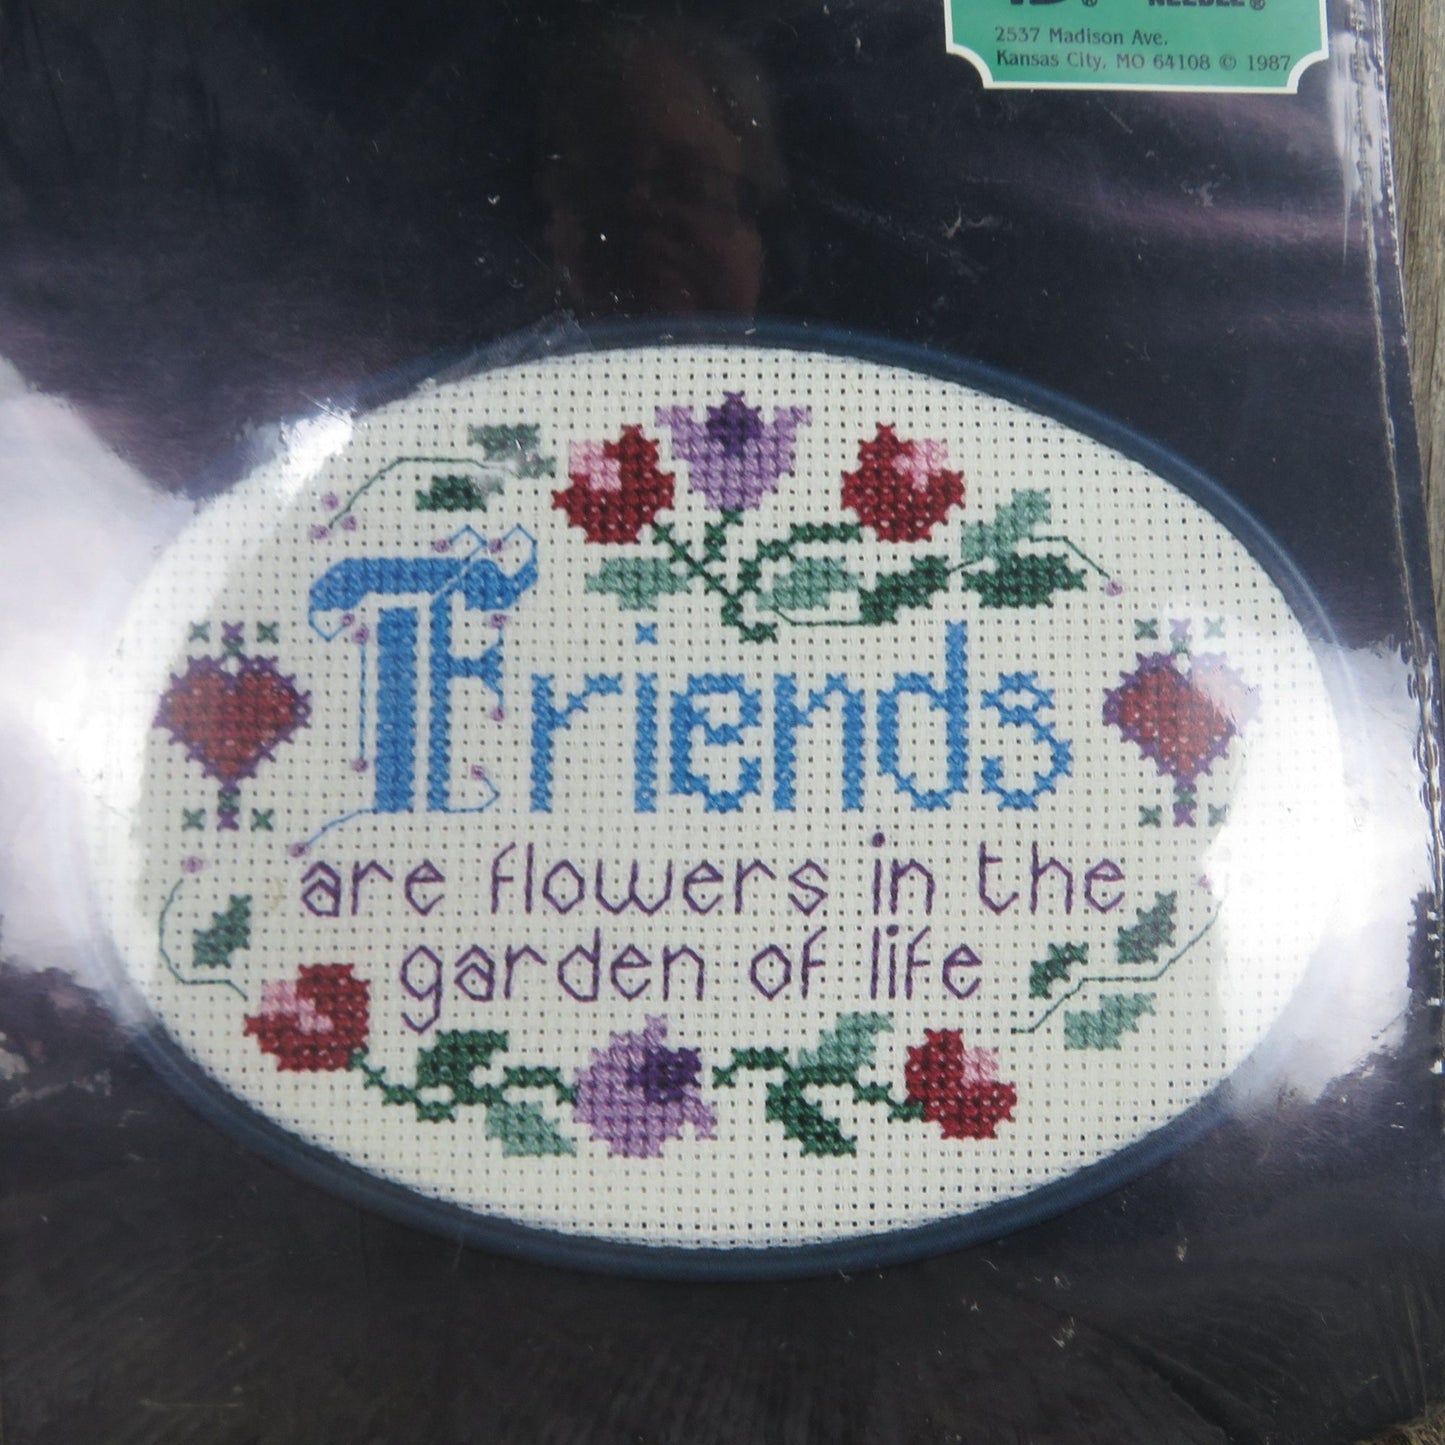 Vintage Counted Cross Stitch Kit Friends are Flowers 4024 Designs for the Needle 1987 Oval